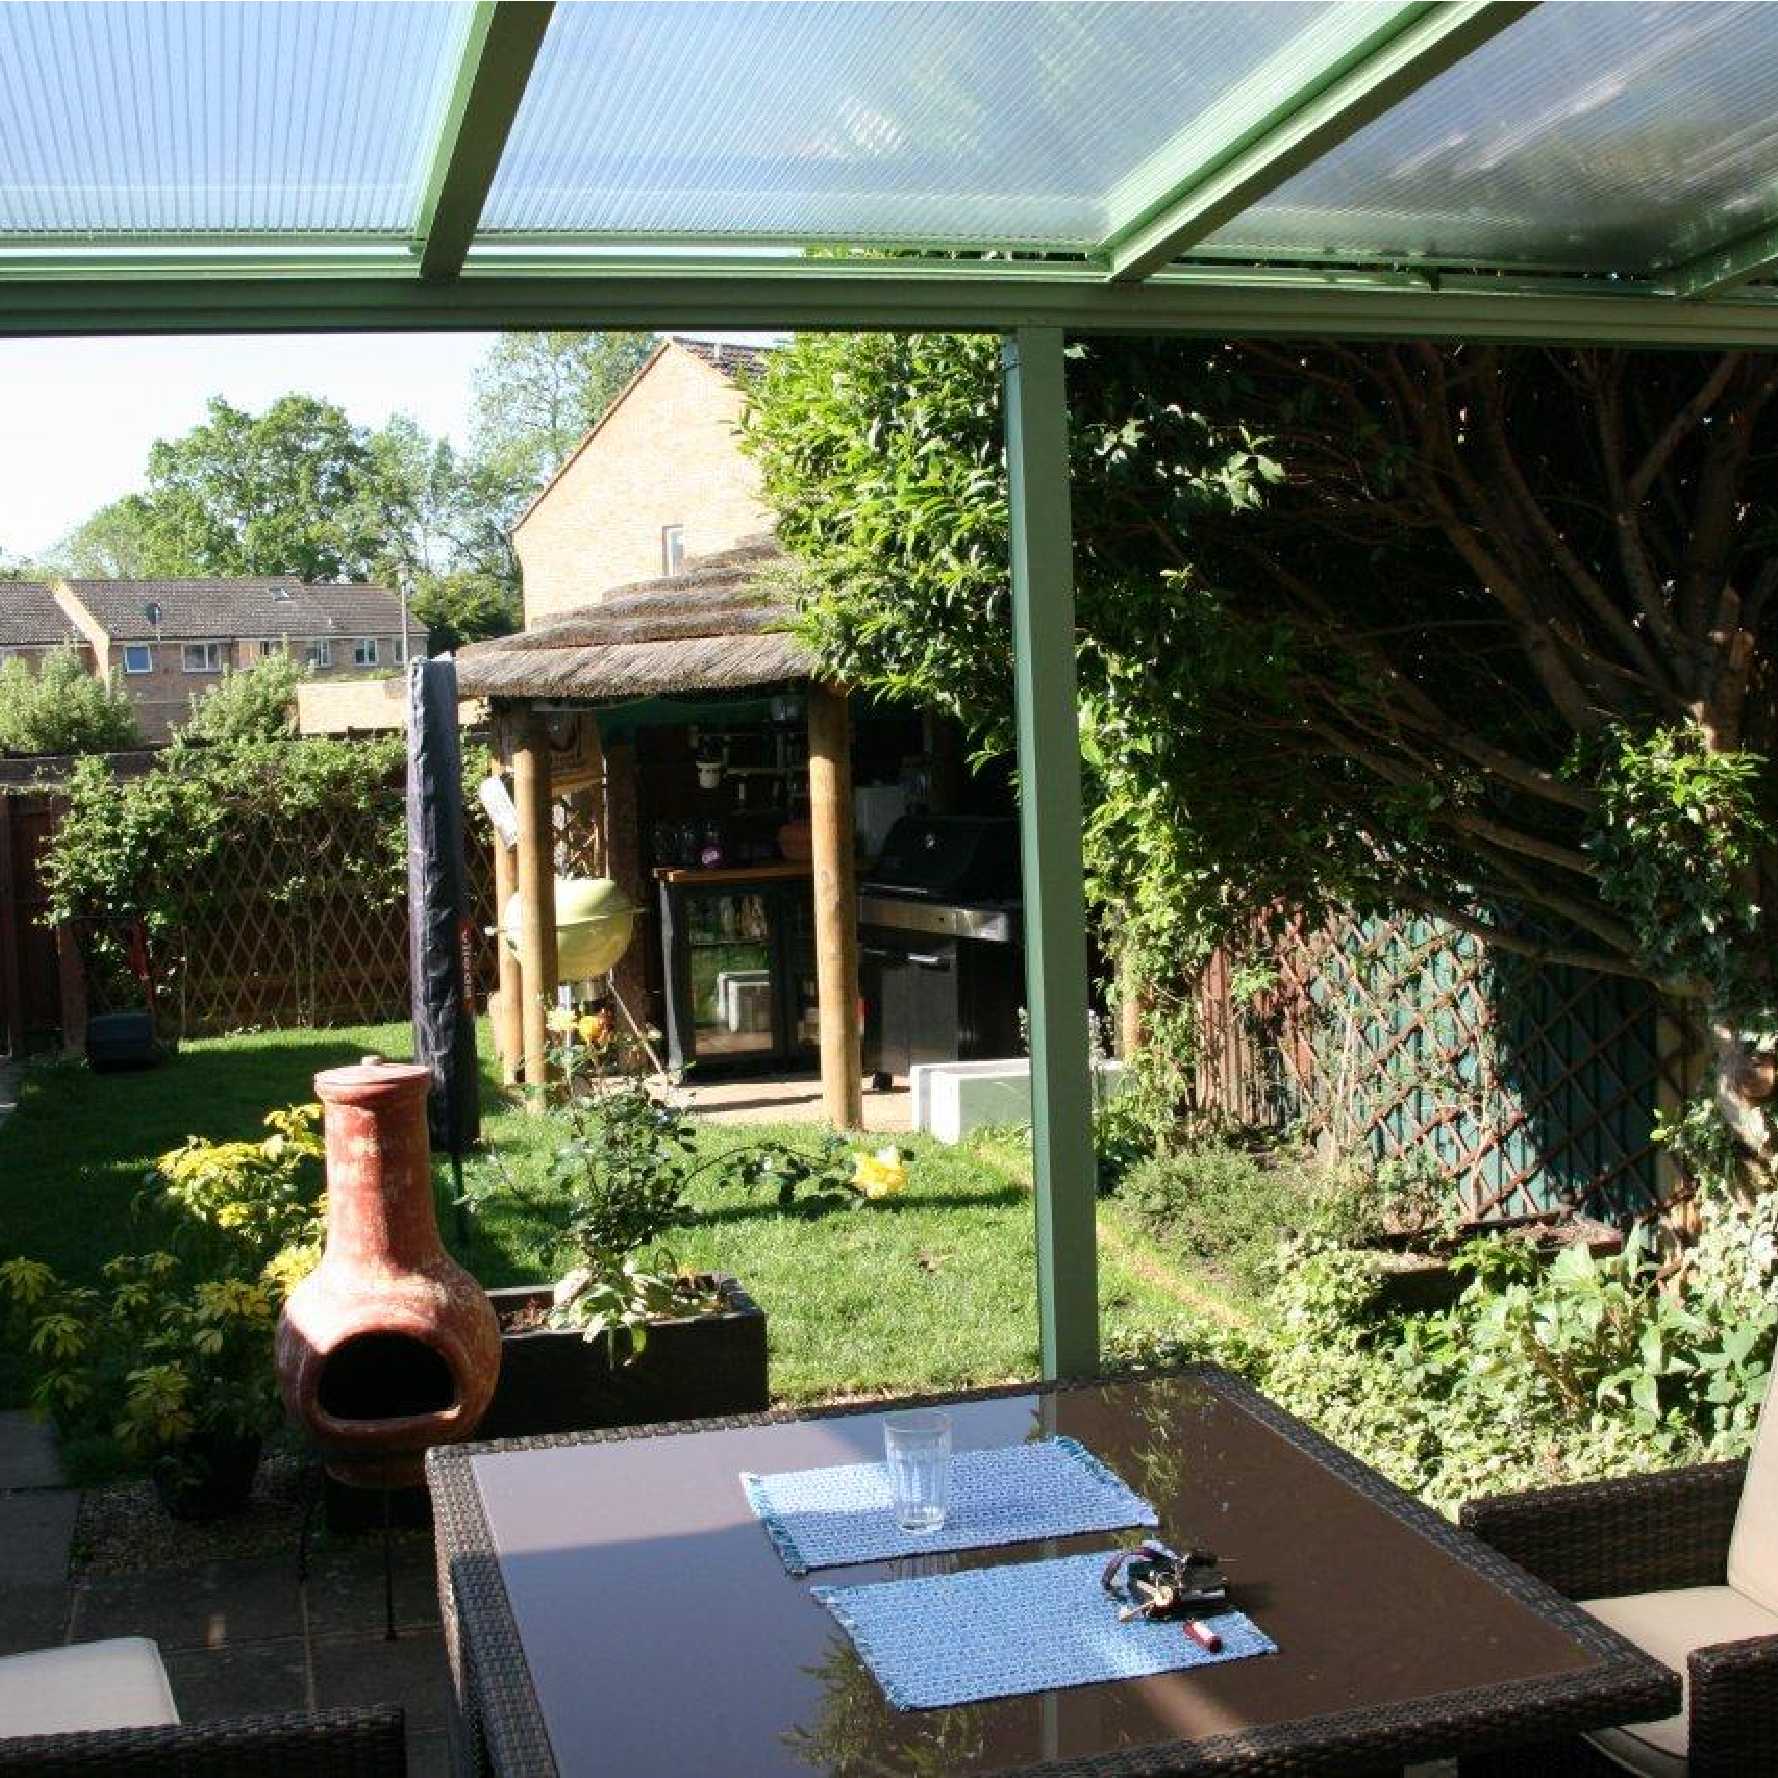 Affordable Omega Smart Lean-To Canopy, White with 16mm Polycarbonate Glazing - 3.1m (W) x 2.0m (P), (2) Supporting Posts